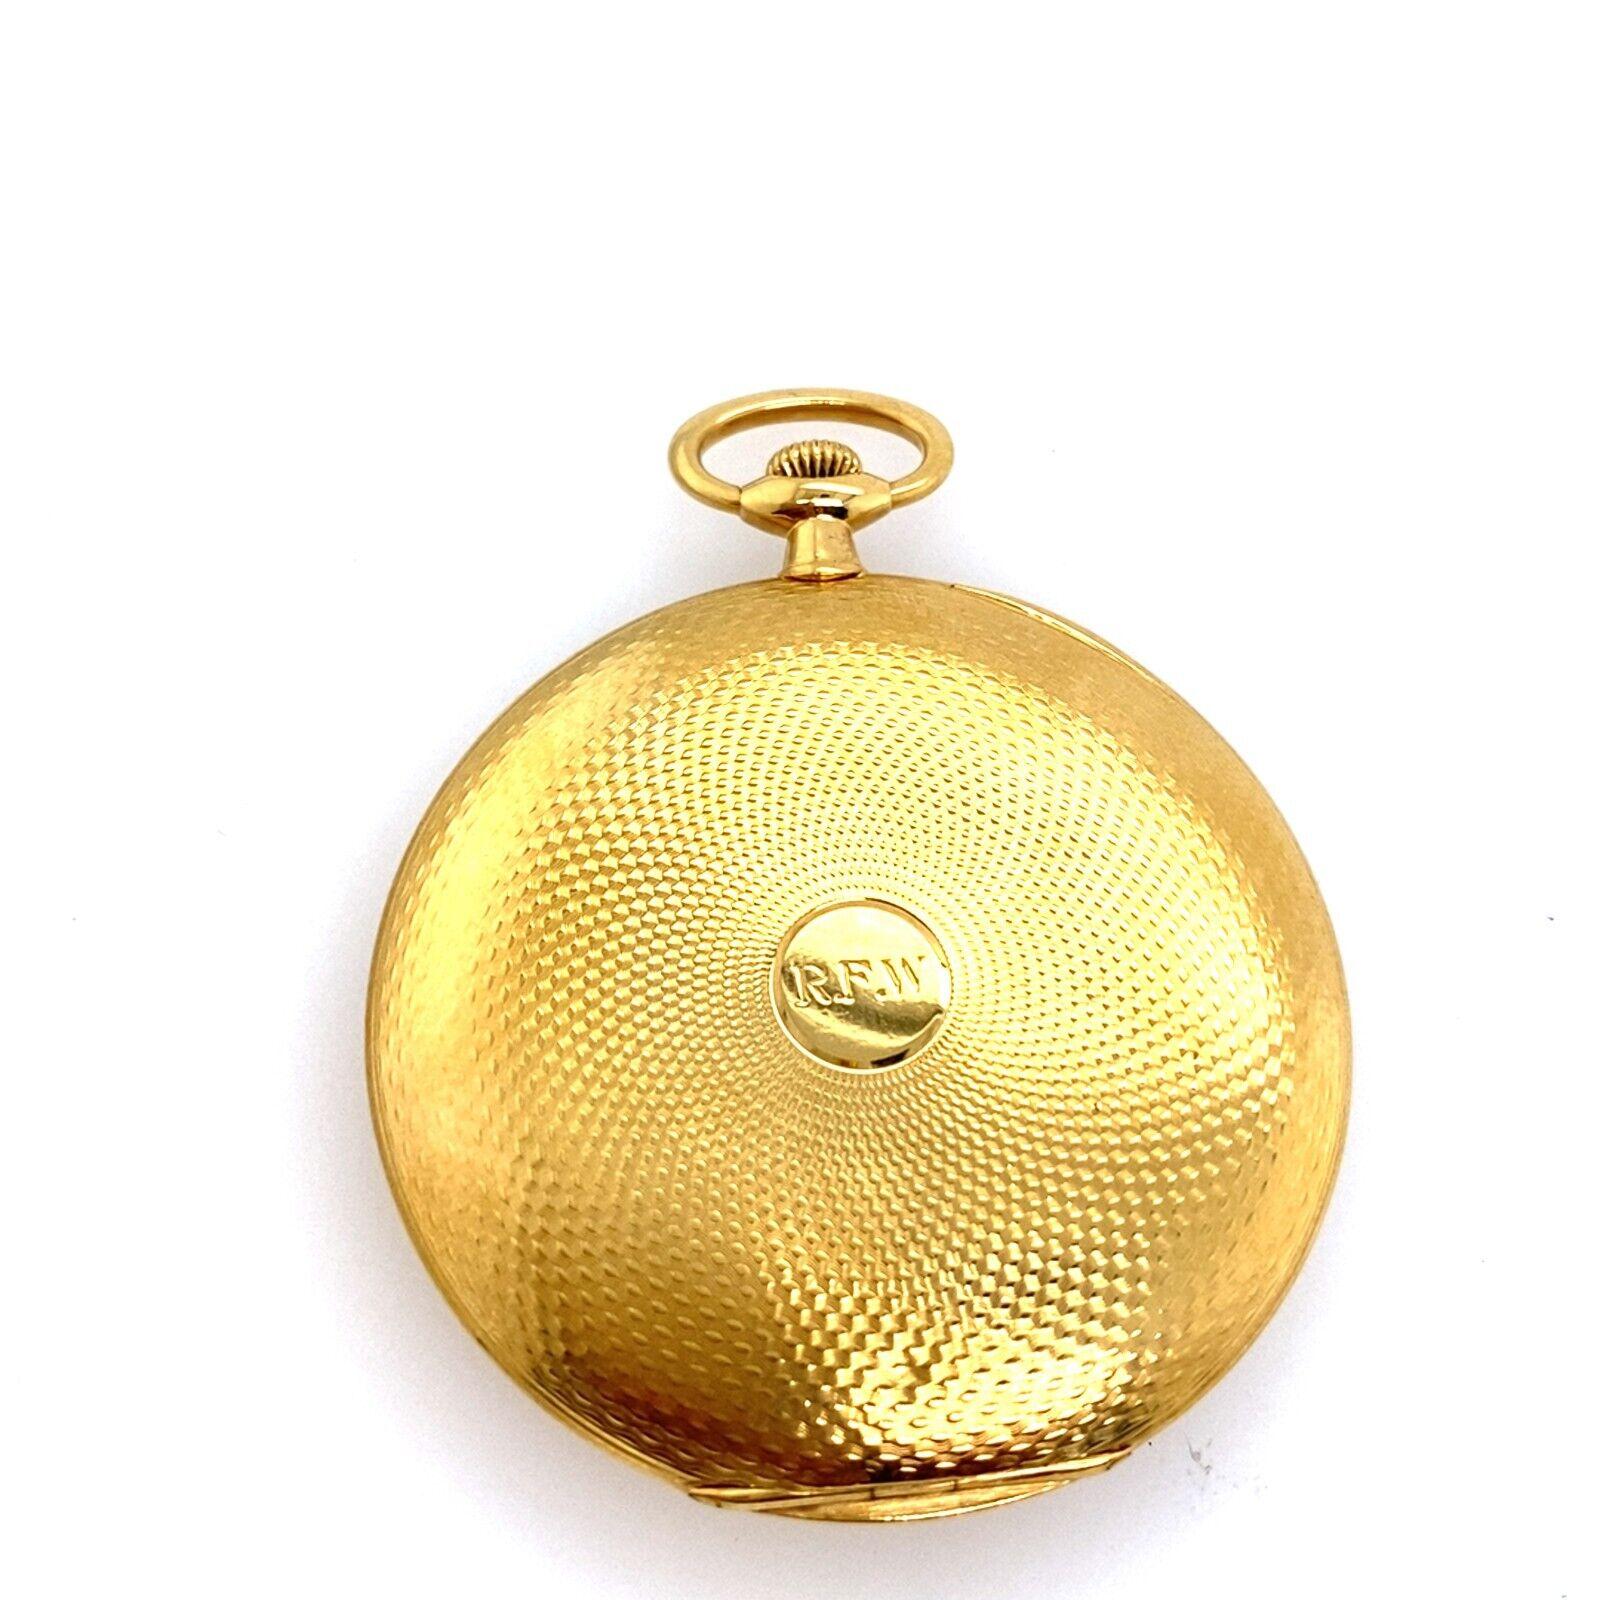 Asprey is one of the world's most prestigious luxury brands. A long history of making the finest and most luxurious timepieces has made Asprey the world's leading maker of pocket watches. This Asprey open face pocket watch is made of 18ct yellow